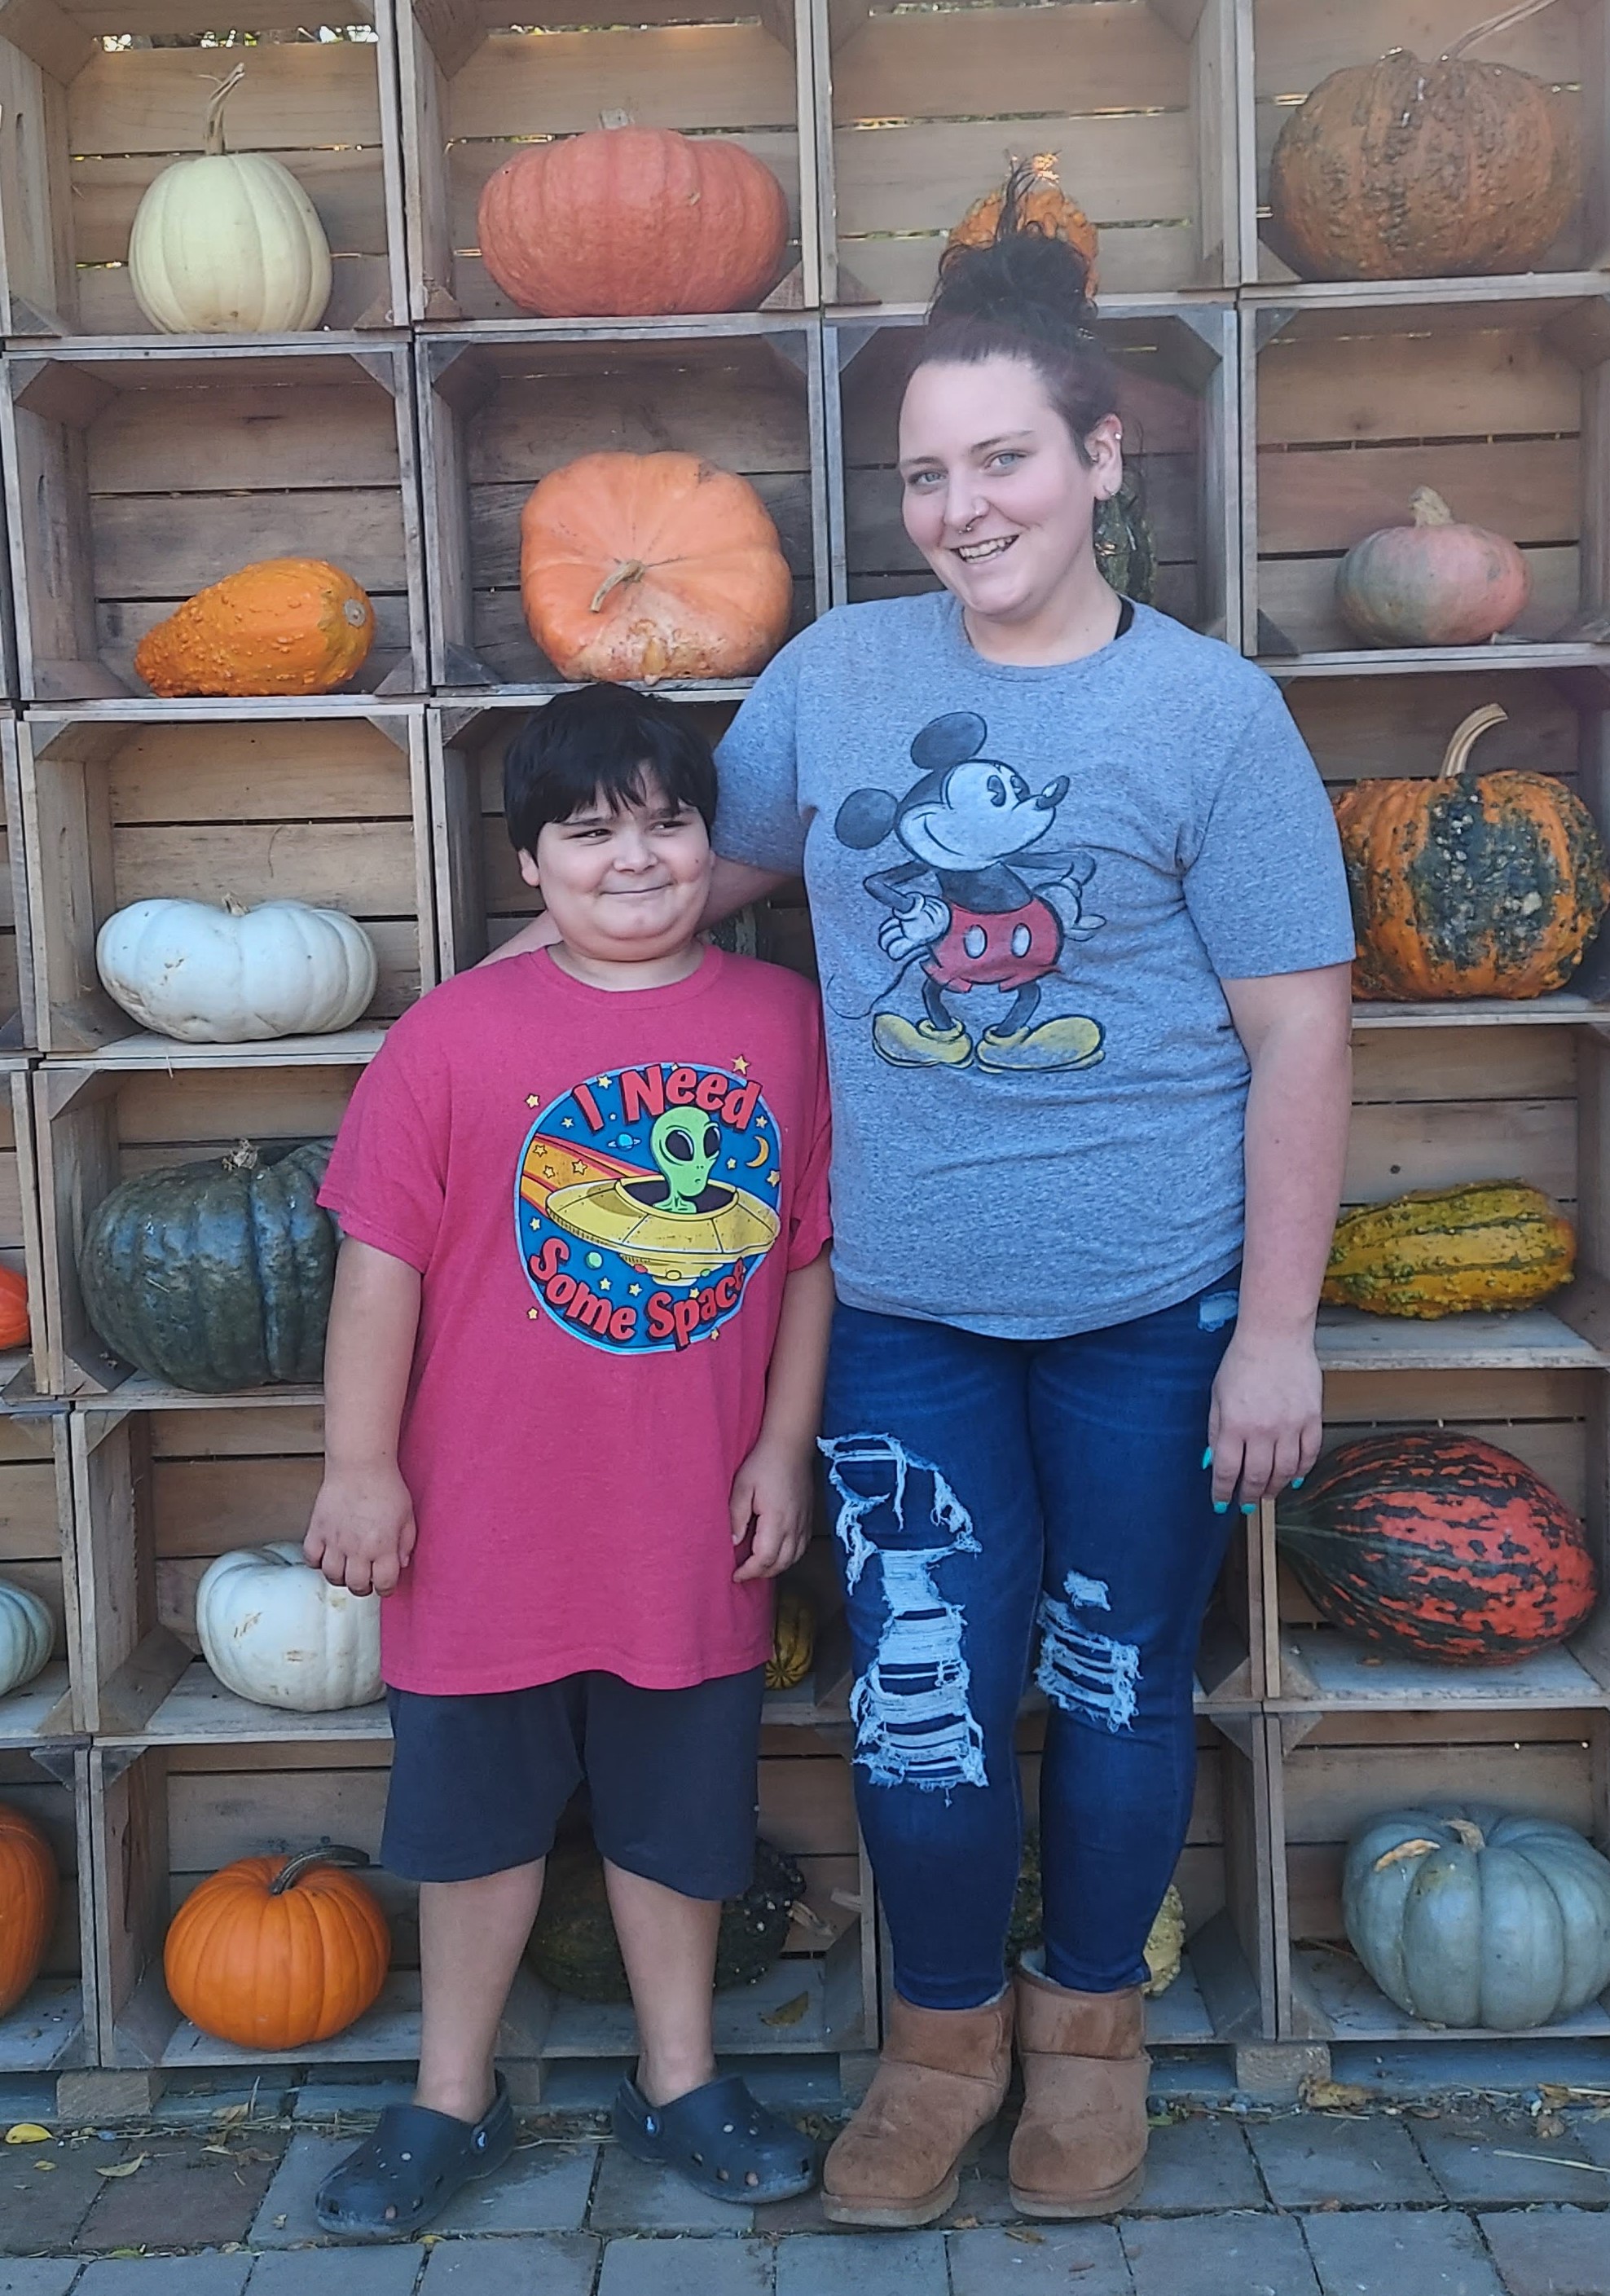 Shannon with son Jax standing in front of pumpkins